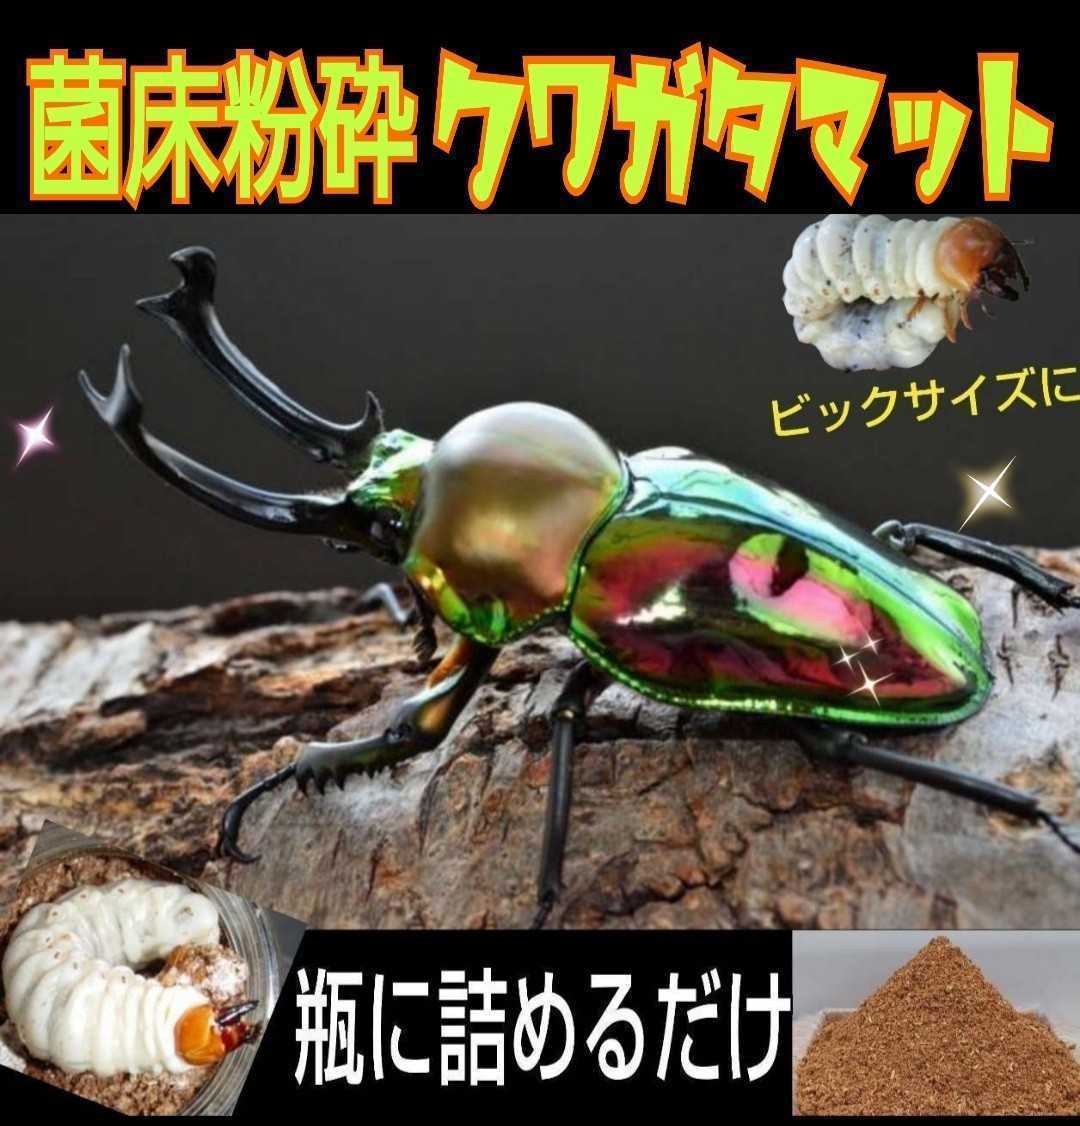  stag beetle larva exclusive use improvement version!. floor crushing mat [10L] bin .... only!o ok wa, common ta,nijiiro.! the first . from feather . till OK. thread. .. fragrance 